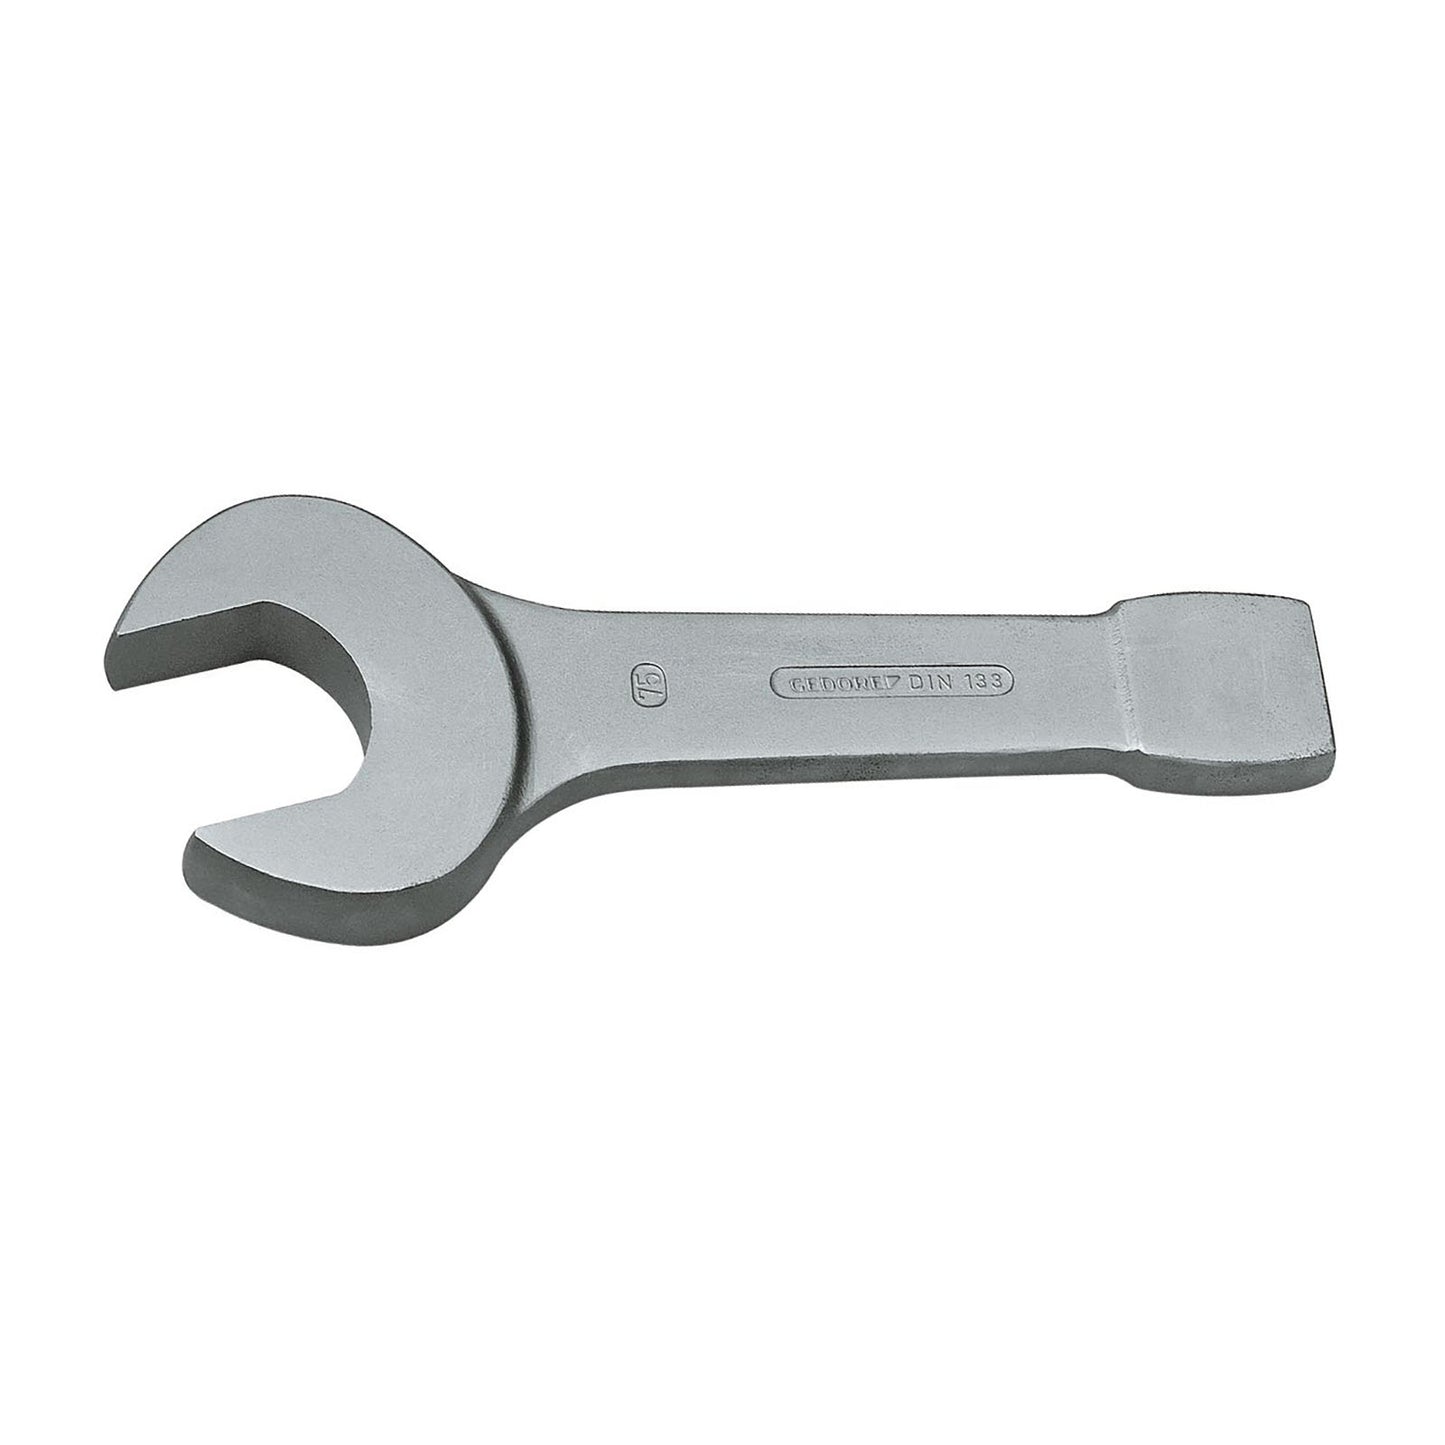 GEDORE 133 46 - Open Strike Wrench, 46mm (6400690)